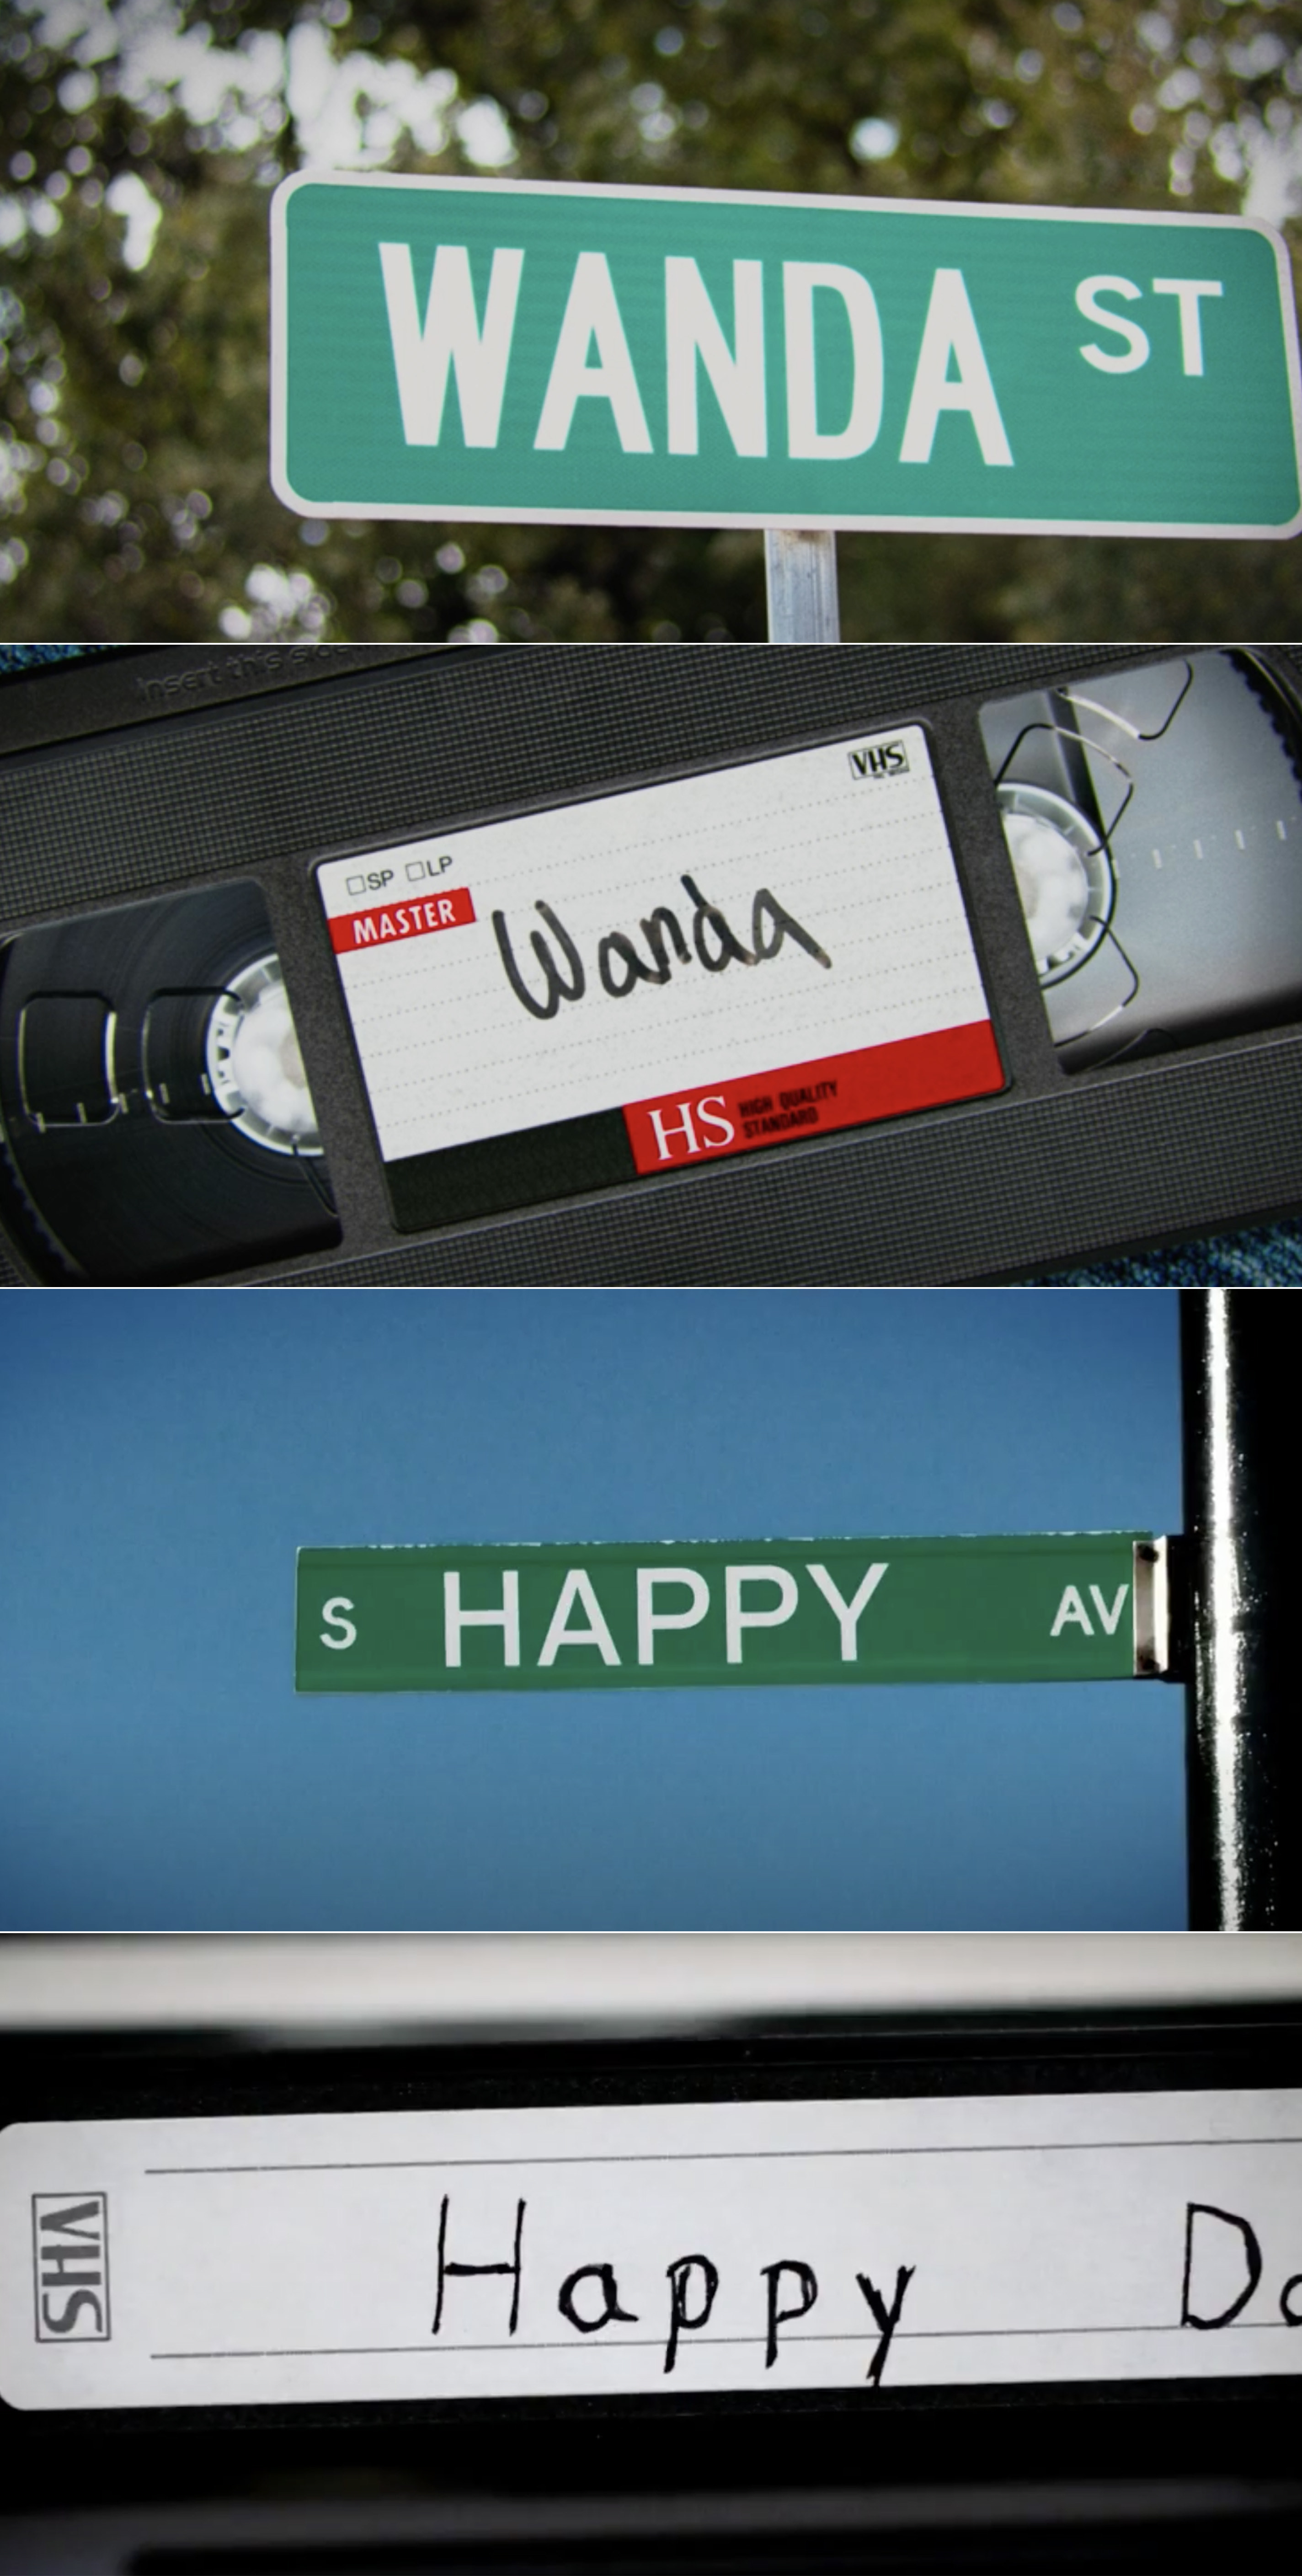 A street sign and VHS tape saying "Wanda" vs. a street sign and VHS tape saying "Happy"